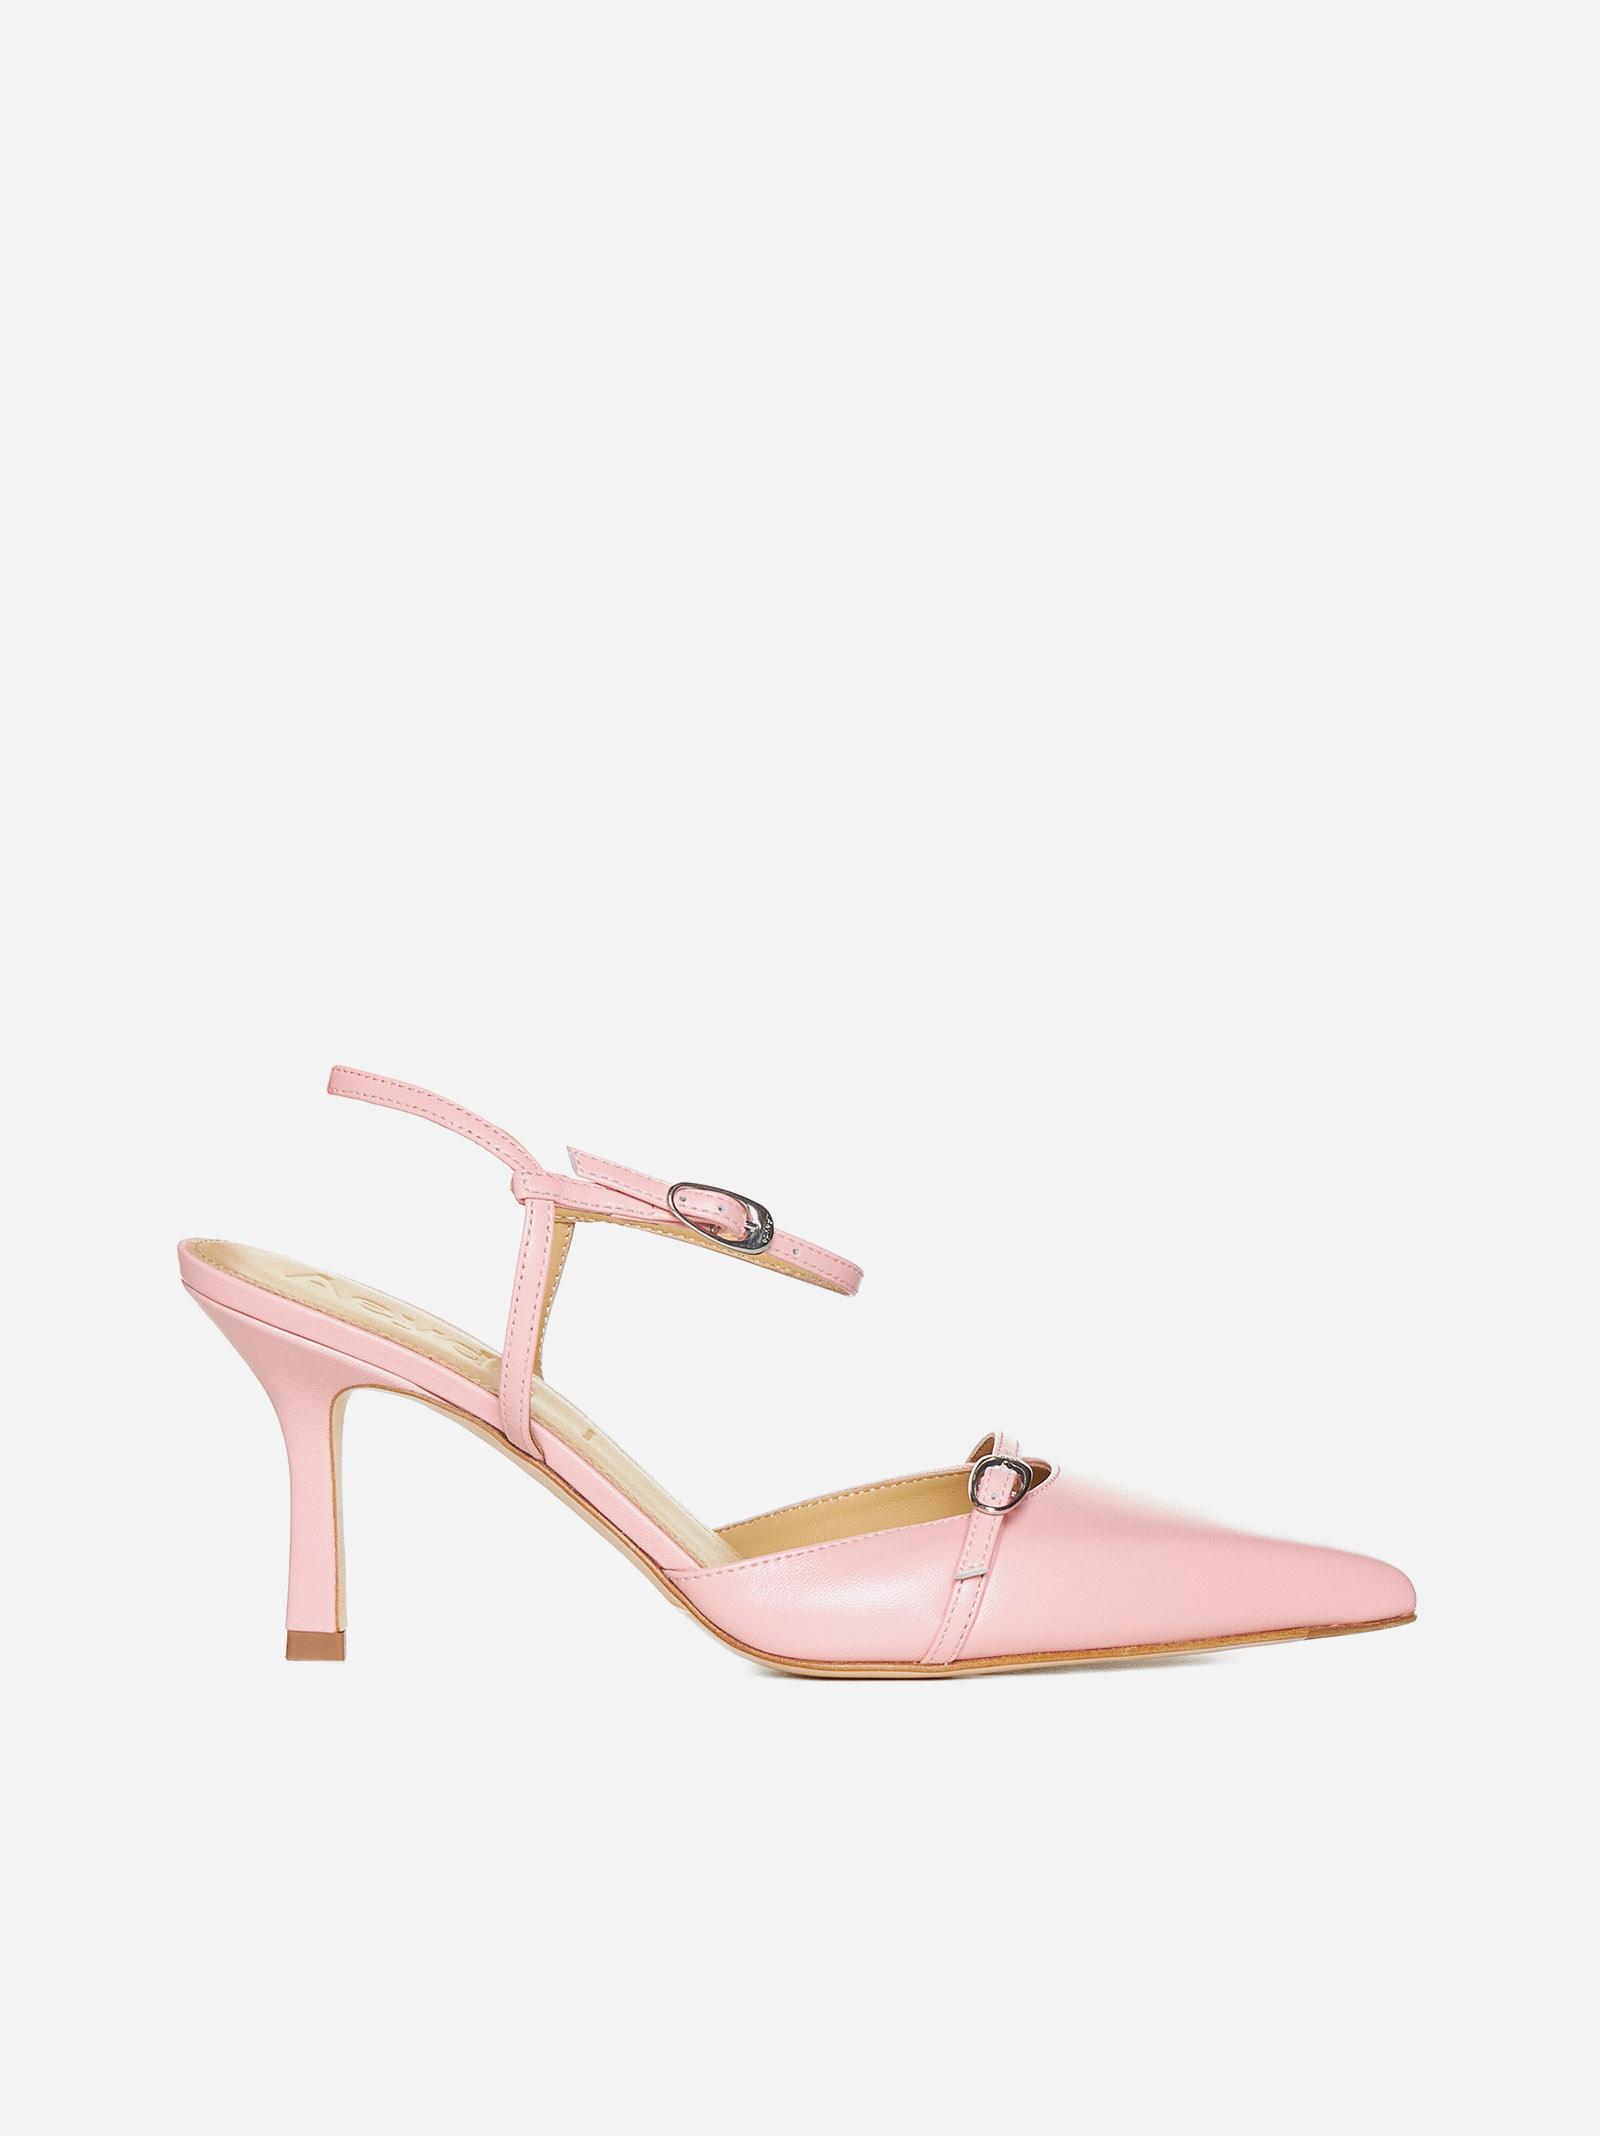 Aeyde Marianna Nappa Leather Slingback Pumps in Pink | Lyst UK